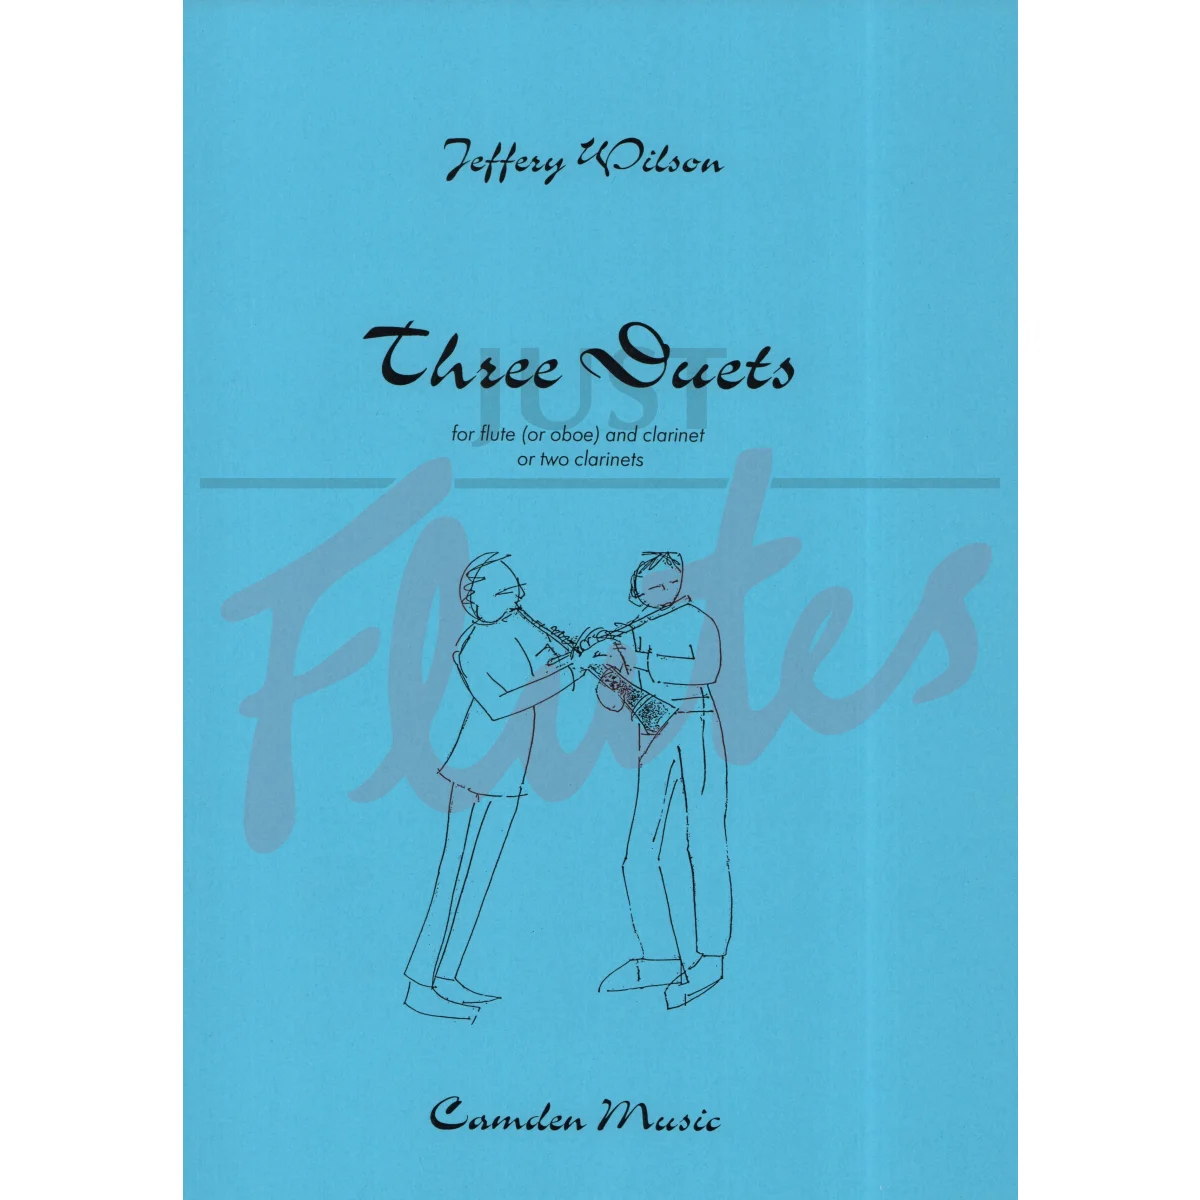 Three Duets for Flute and Clarinet